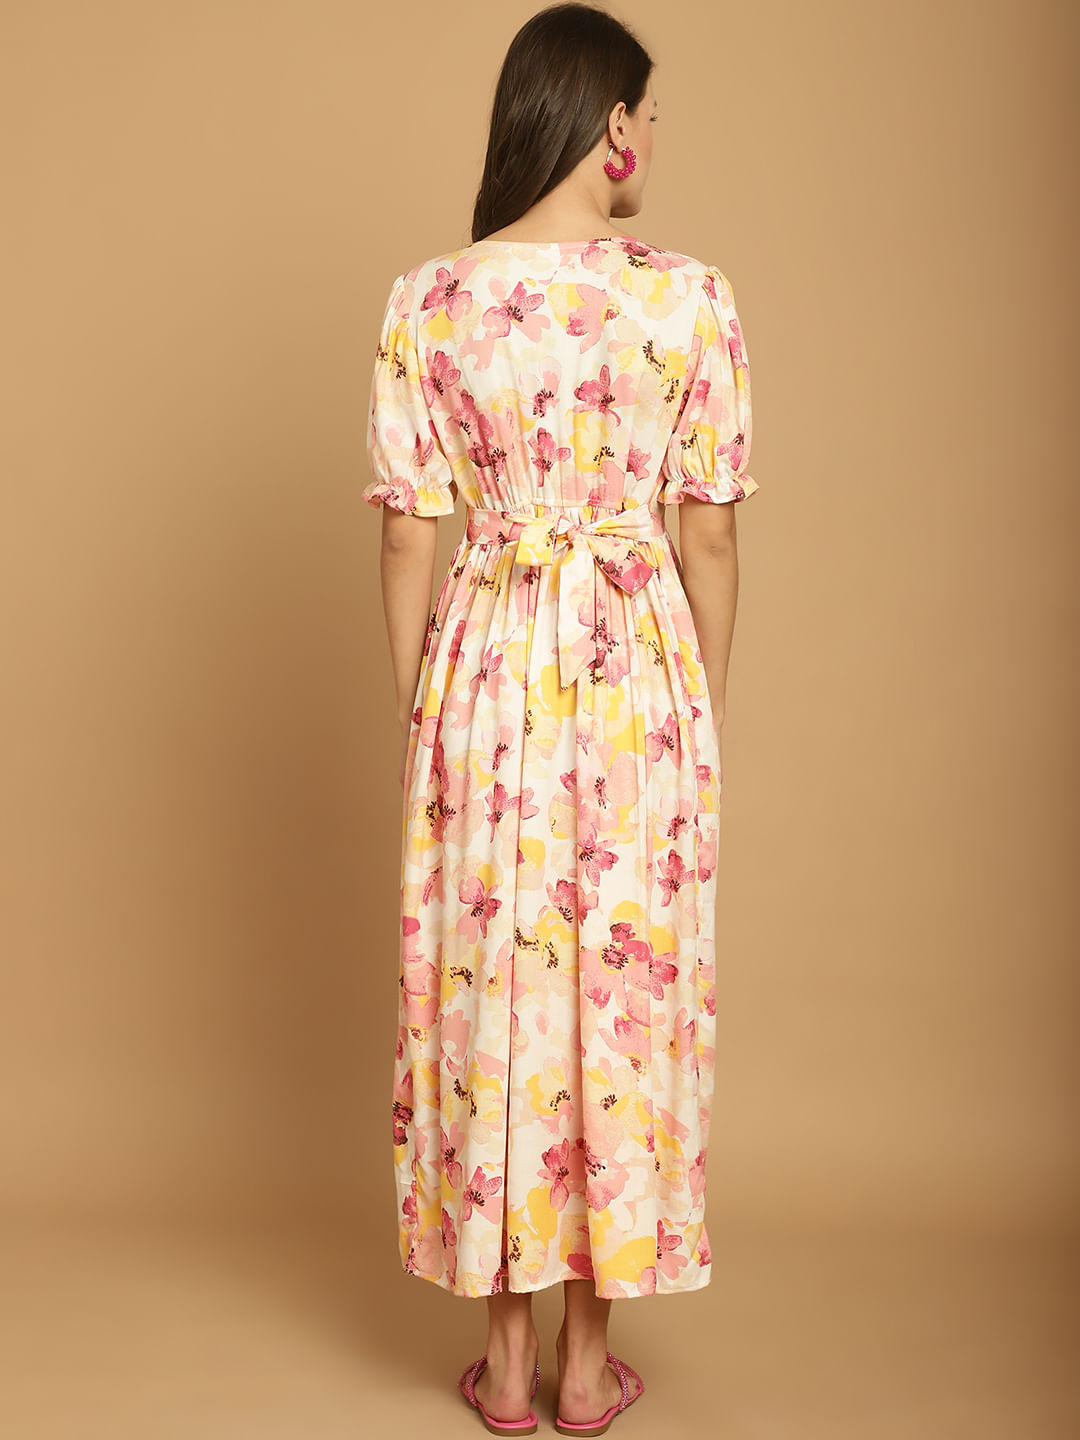 Beige Floral Rayon Maternity Dress